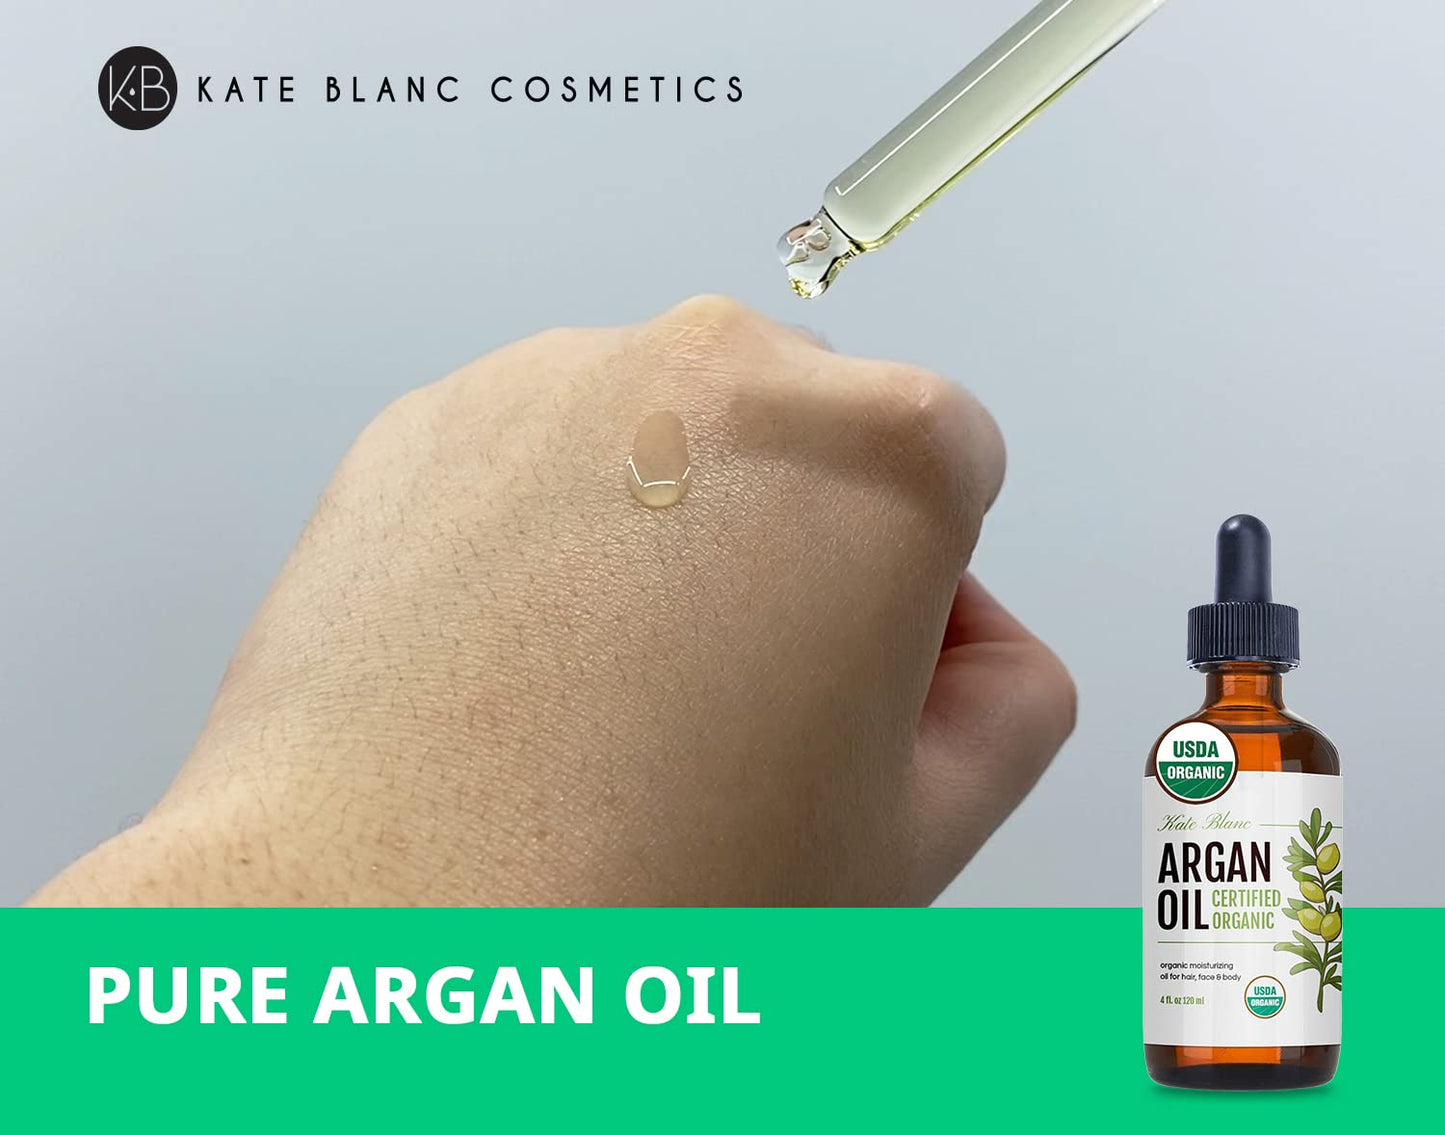 Kate Blanc Cosmetics Argan Oil for Hair and Skin Moisturizer (Light 4oz) 100% Pure Cold Pressed Organic Argan Hair Oil for Curly Frizzy Hair. Stimulate Growth for Dry Damaged Hair